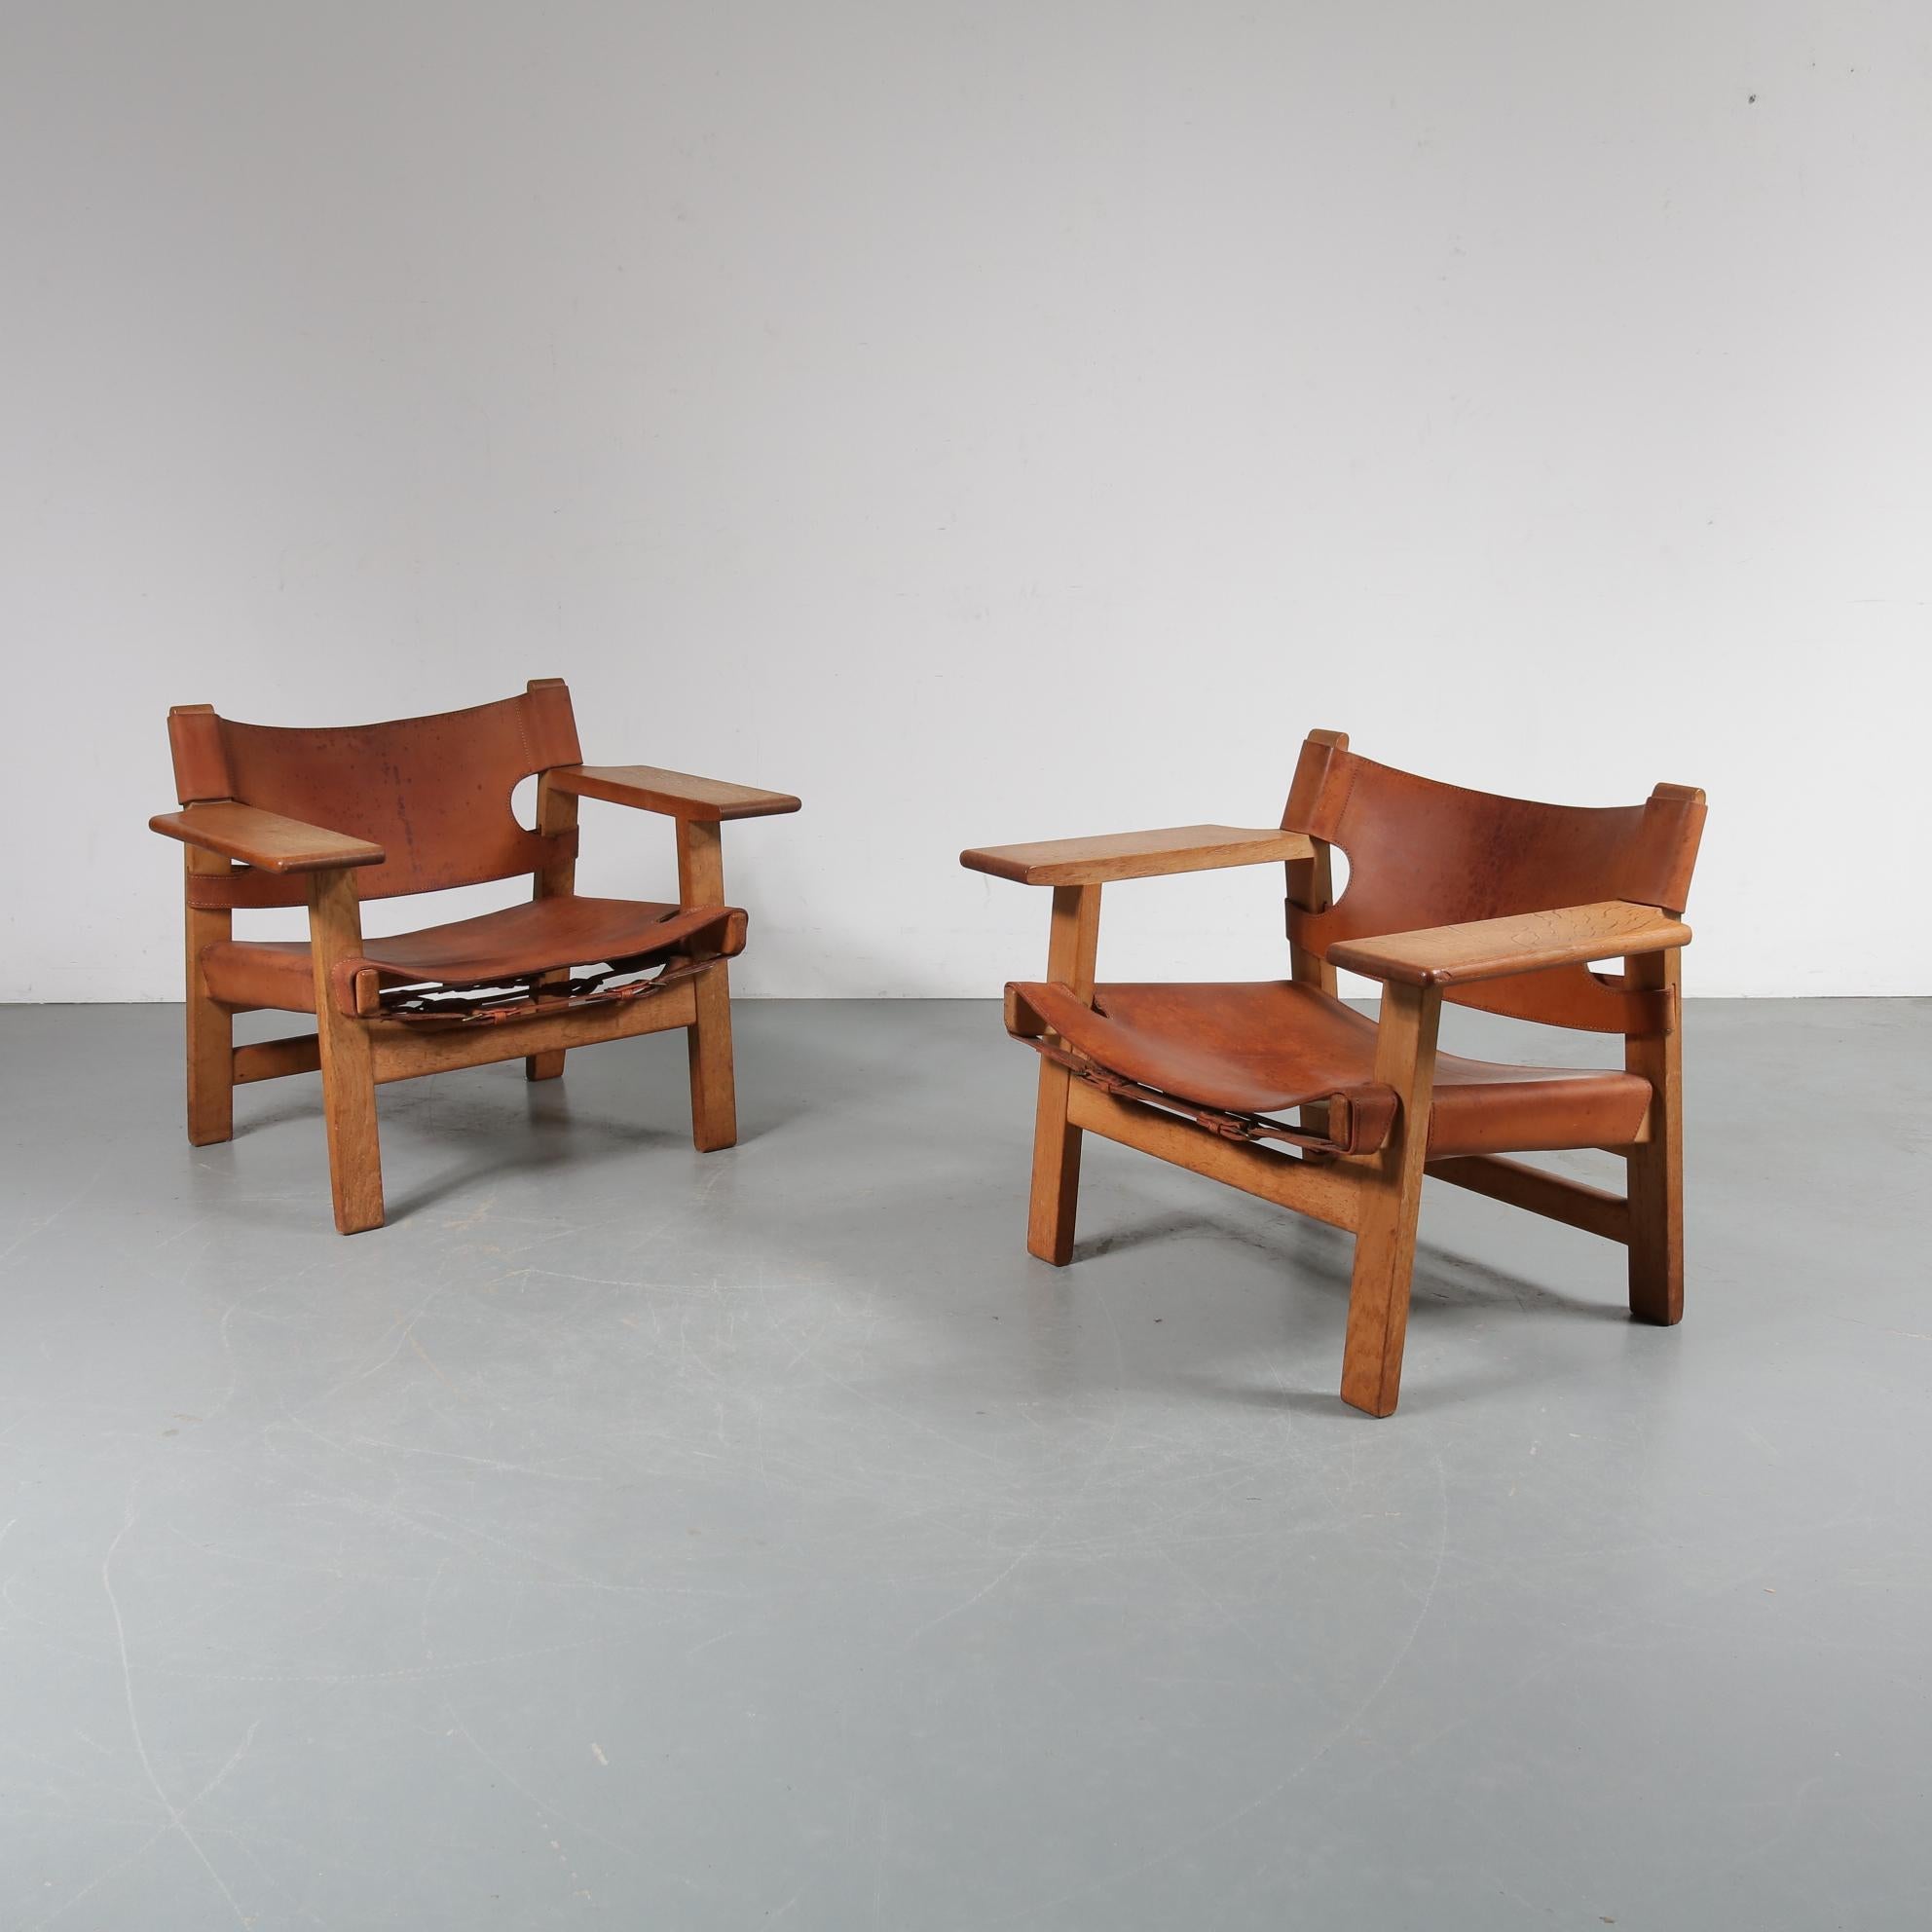 A beautiful pair of Spanish chairs, designed by Børge Mogensen for Frederica Stolefabrik, Denmark, circa 1950.

These very rare, eye-catching chairs are made of beautiful oakwood. They have a strong cognac leather seat and backrest, giving them a